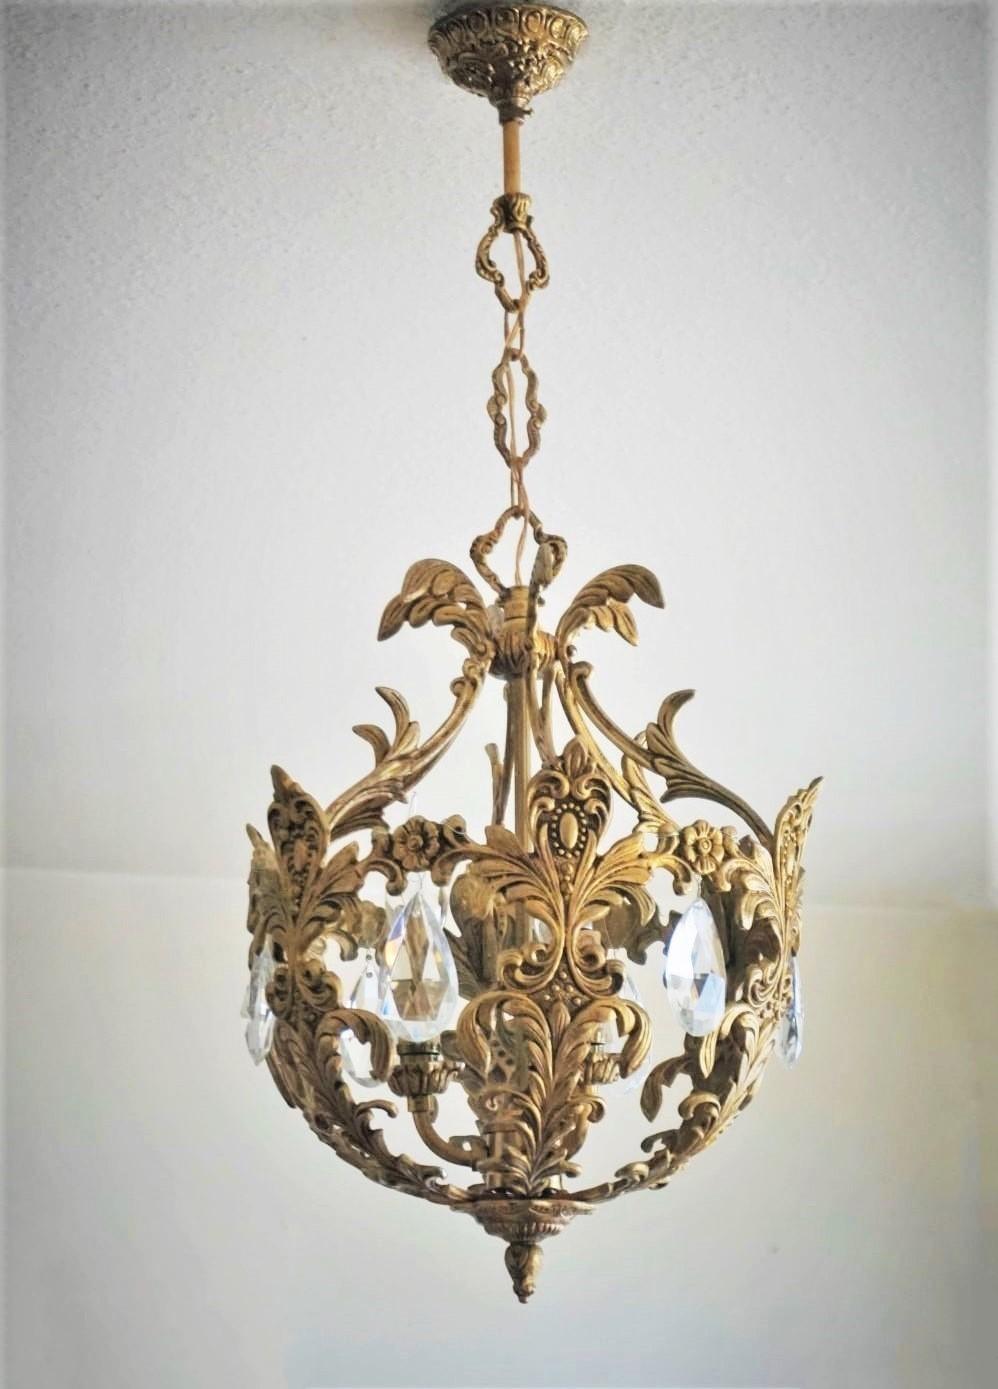 A lovely Art Deco gilt bronze and crystal chandelier or lantern with a three-light central candelabra cluster, France, 1910-1920.
Three E14 light bulb sockets.
Measures:
Overall height 28